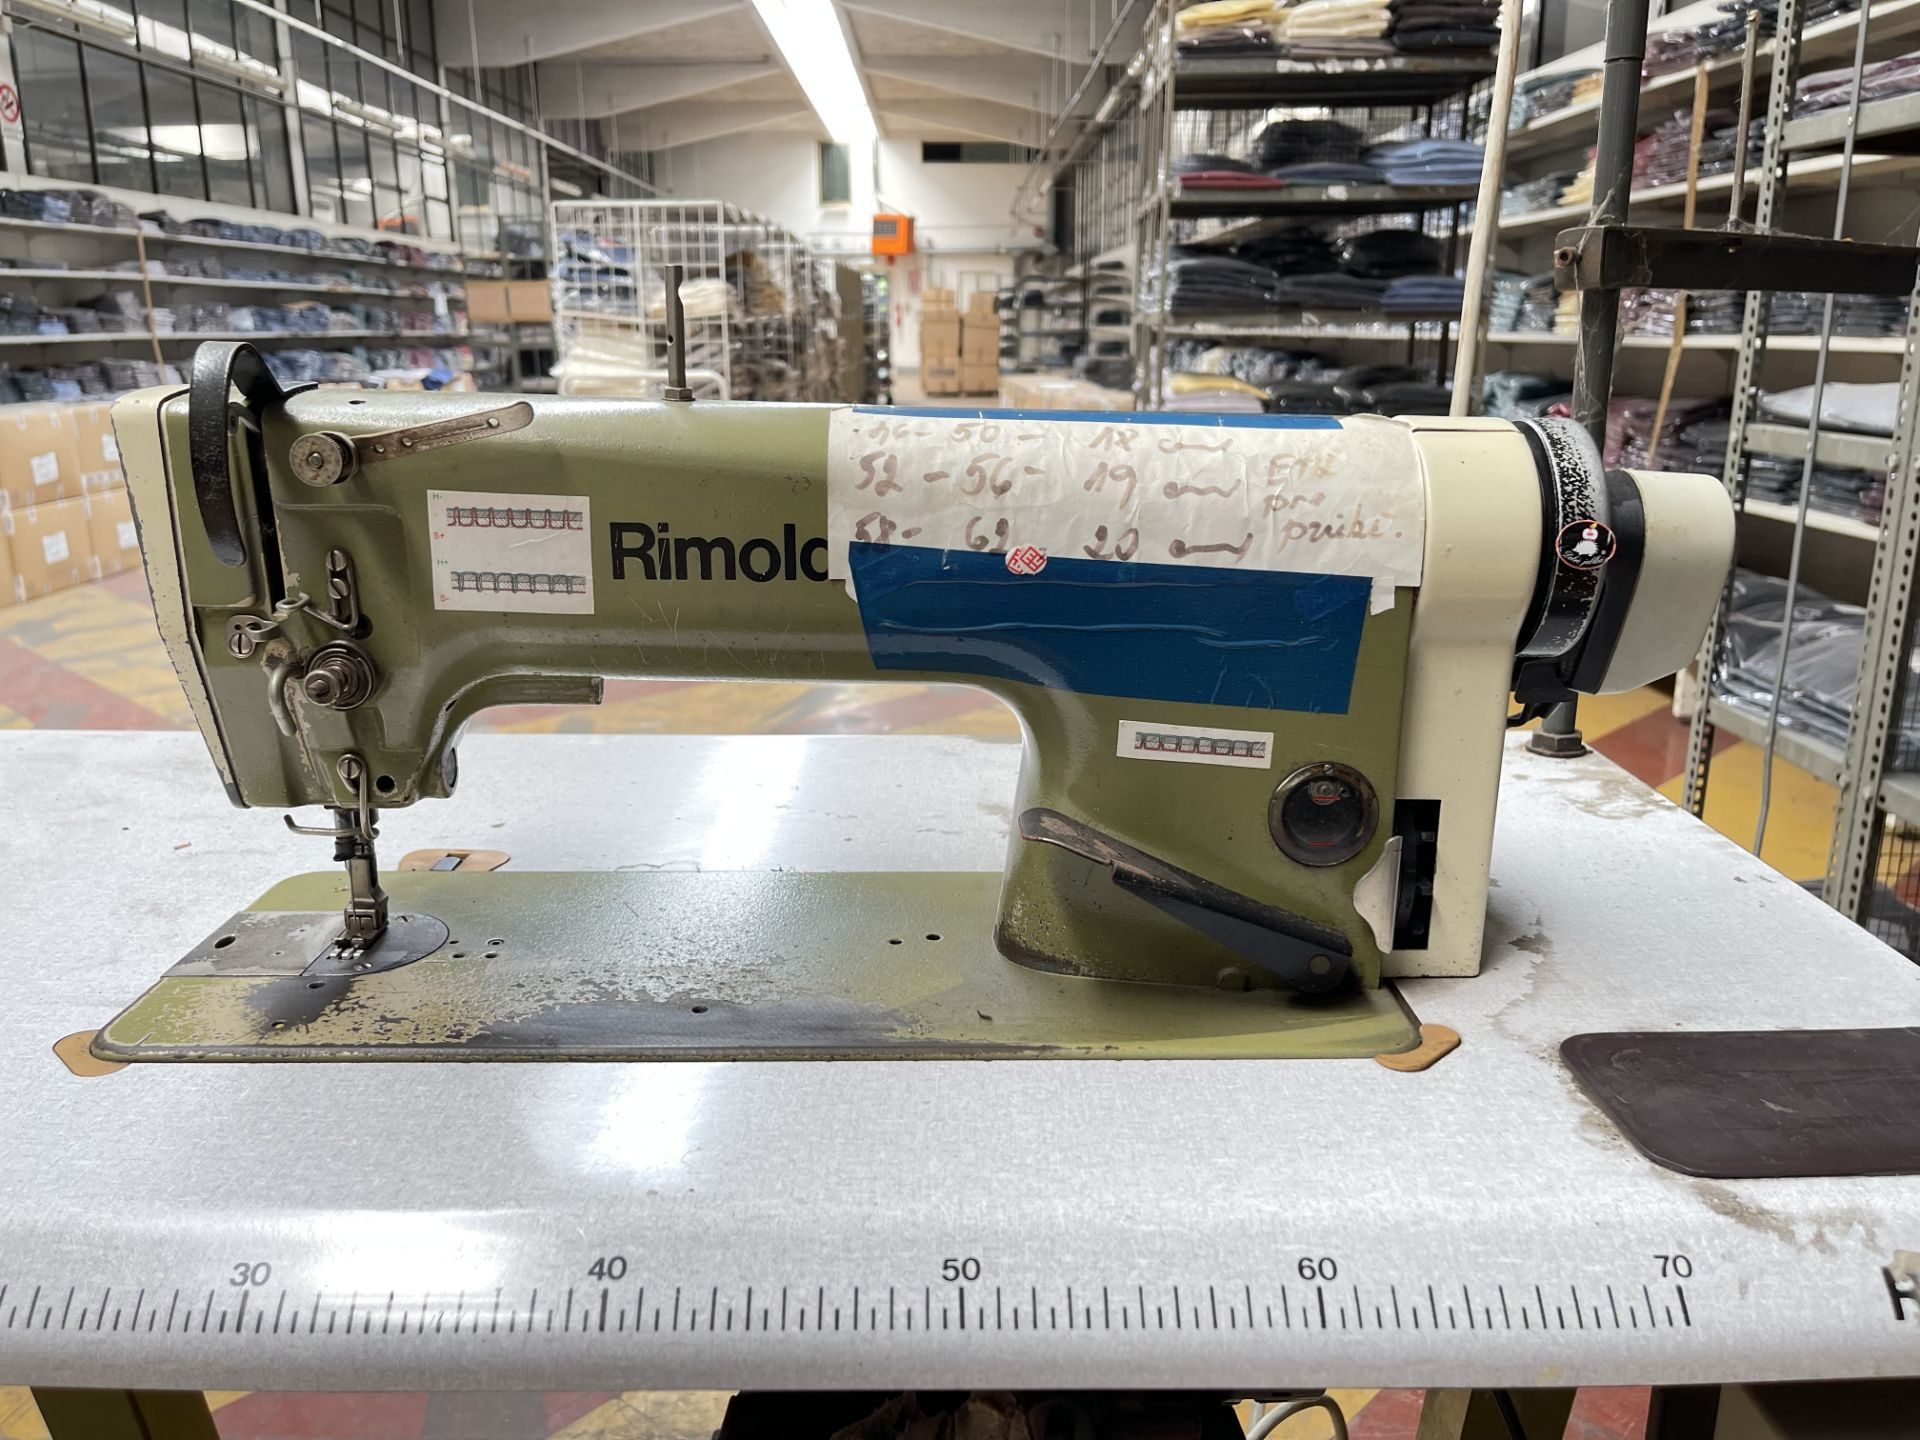 Rimoldi ERP-101-150-00M-00-01 Industrial Sewing machine. S/No 0047258 - Image 3 of 7